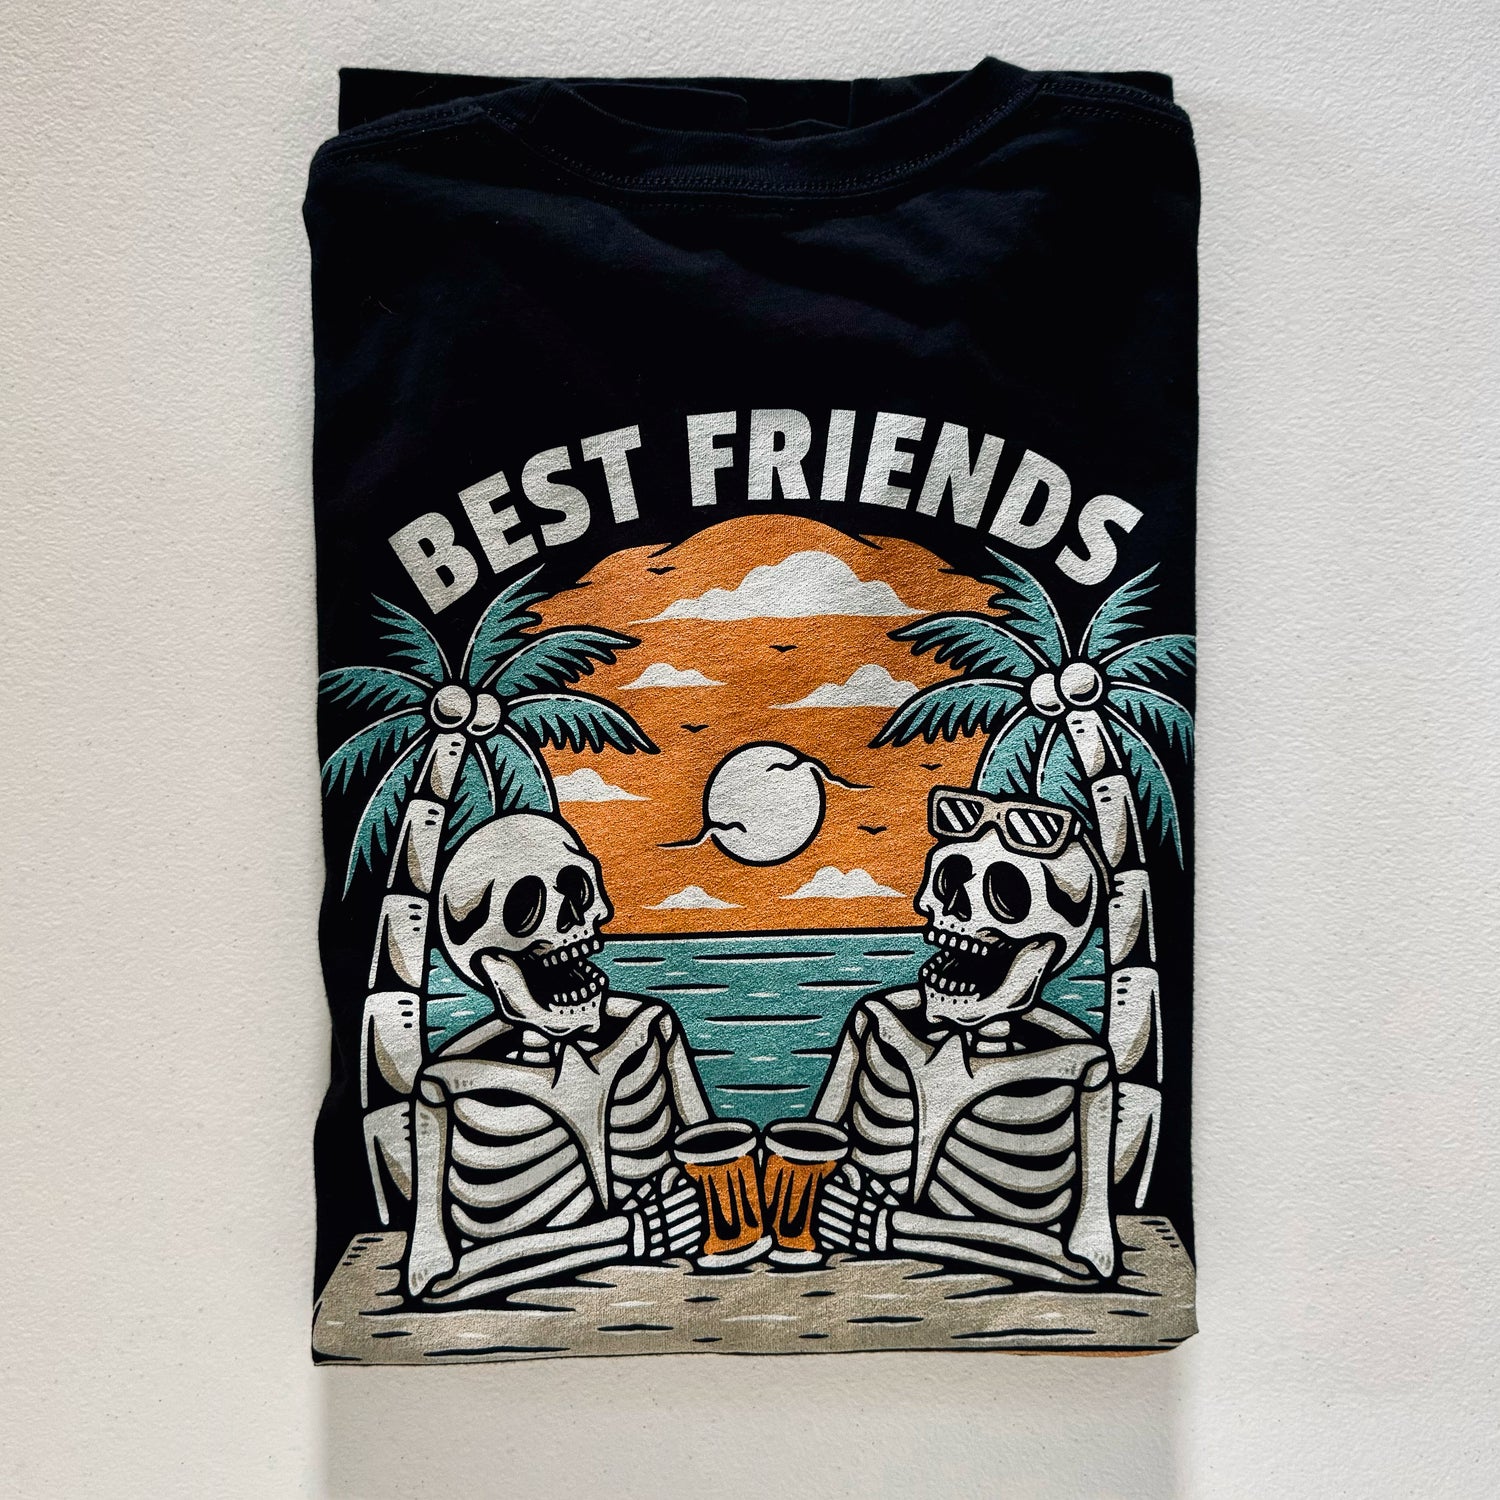 Best Friends folded tee design on a white background.